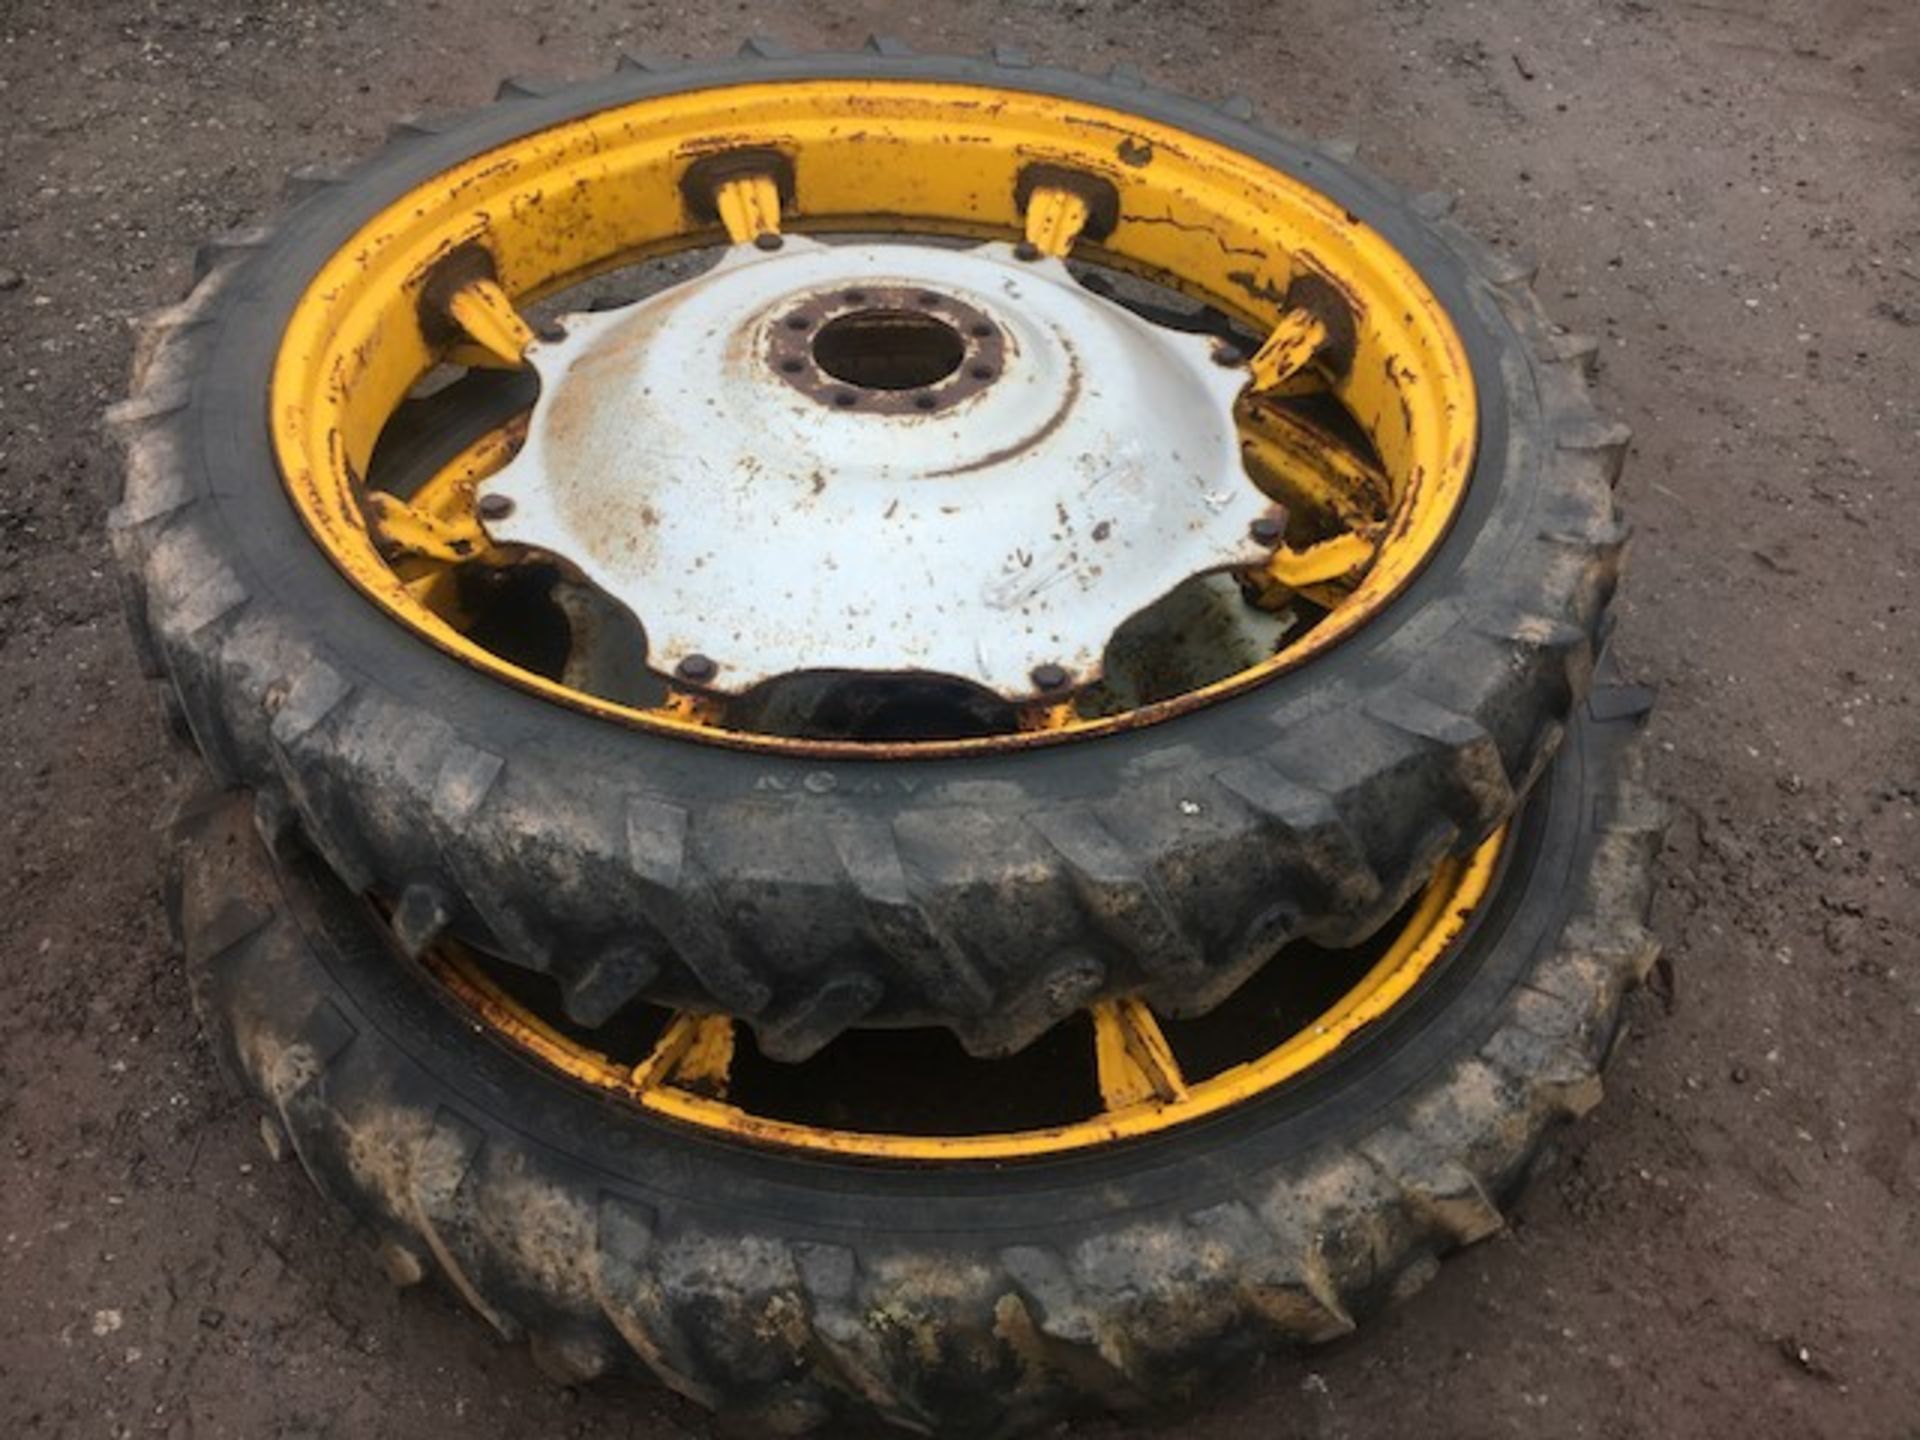 Row Crop Wheels 8.3 x 44 ,Maybe ferry Centres